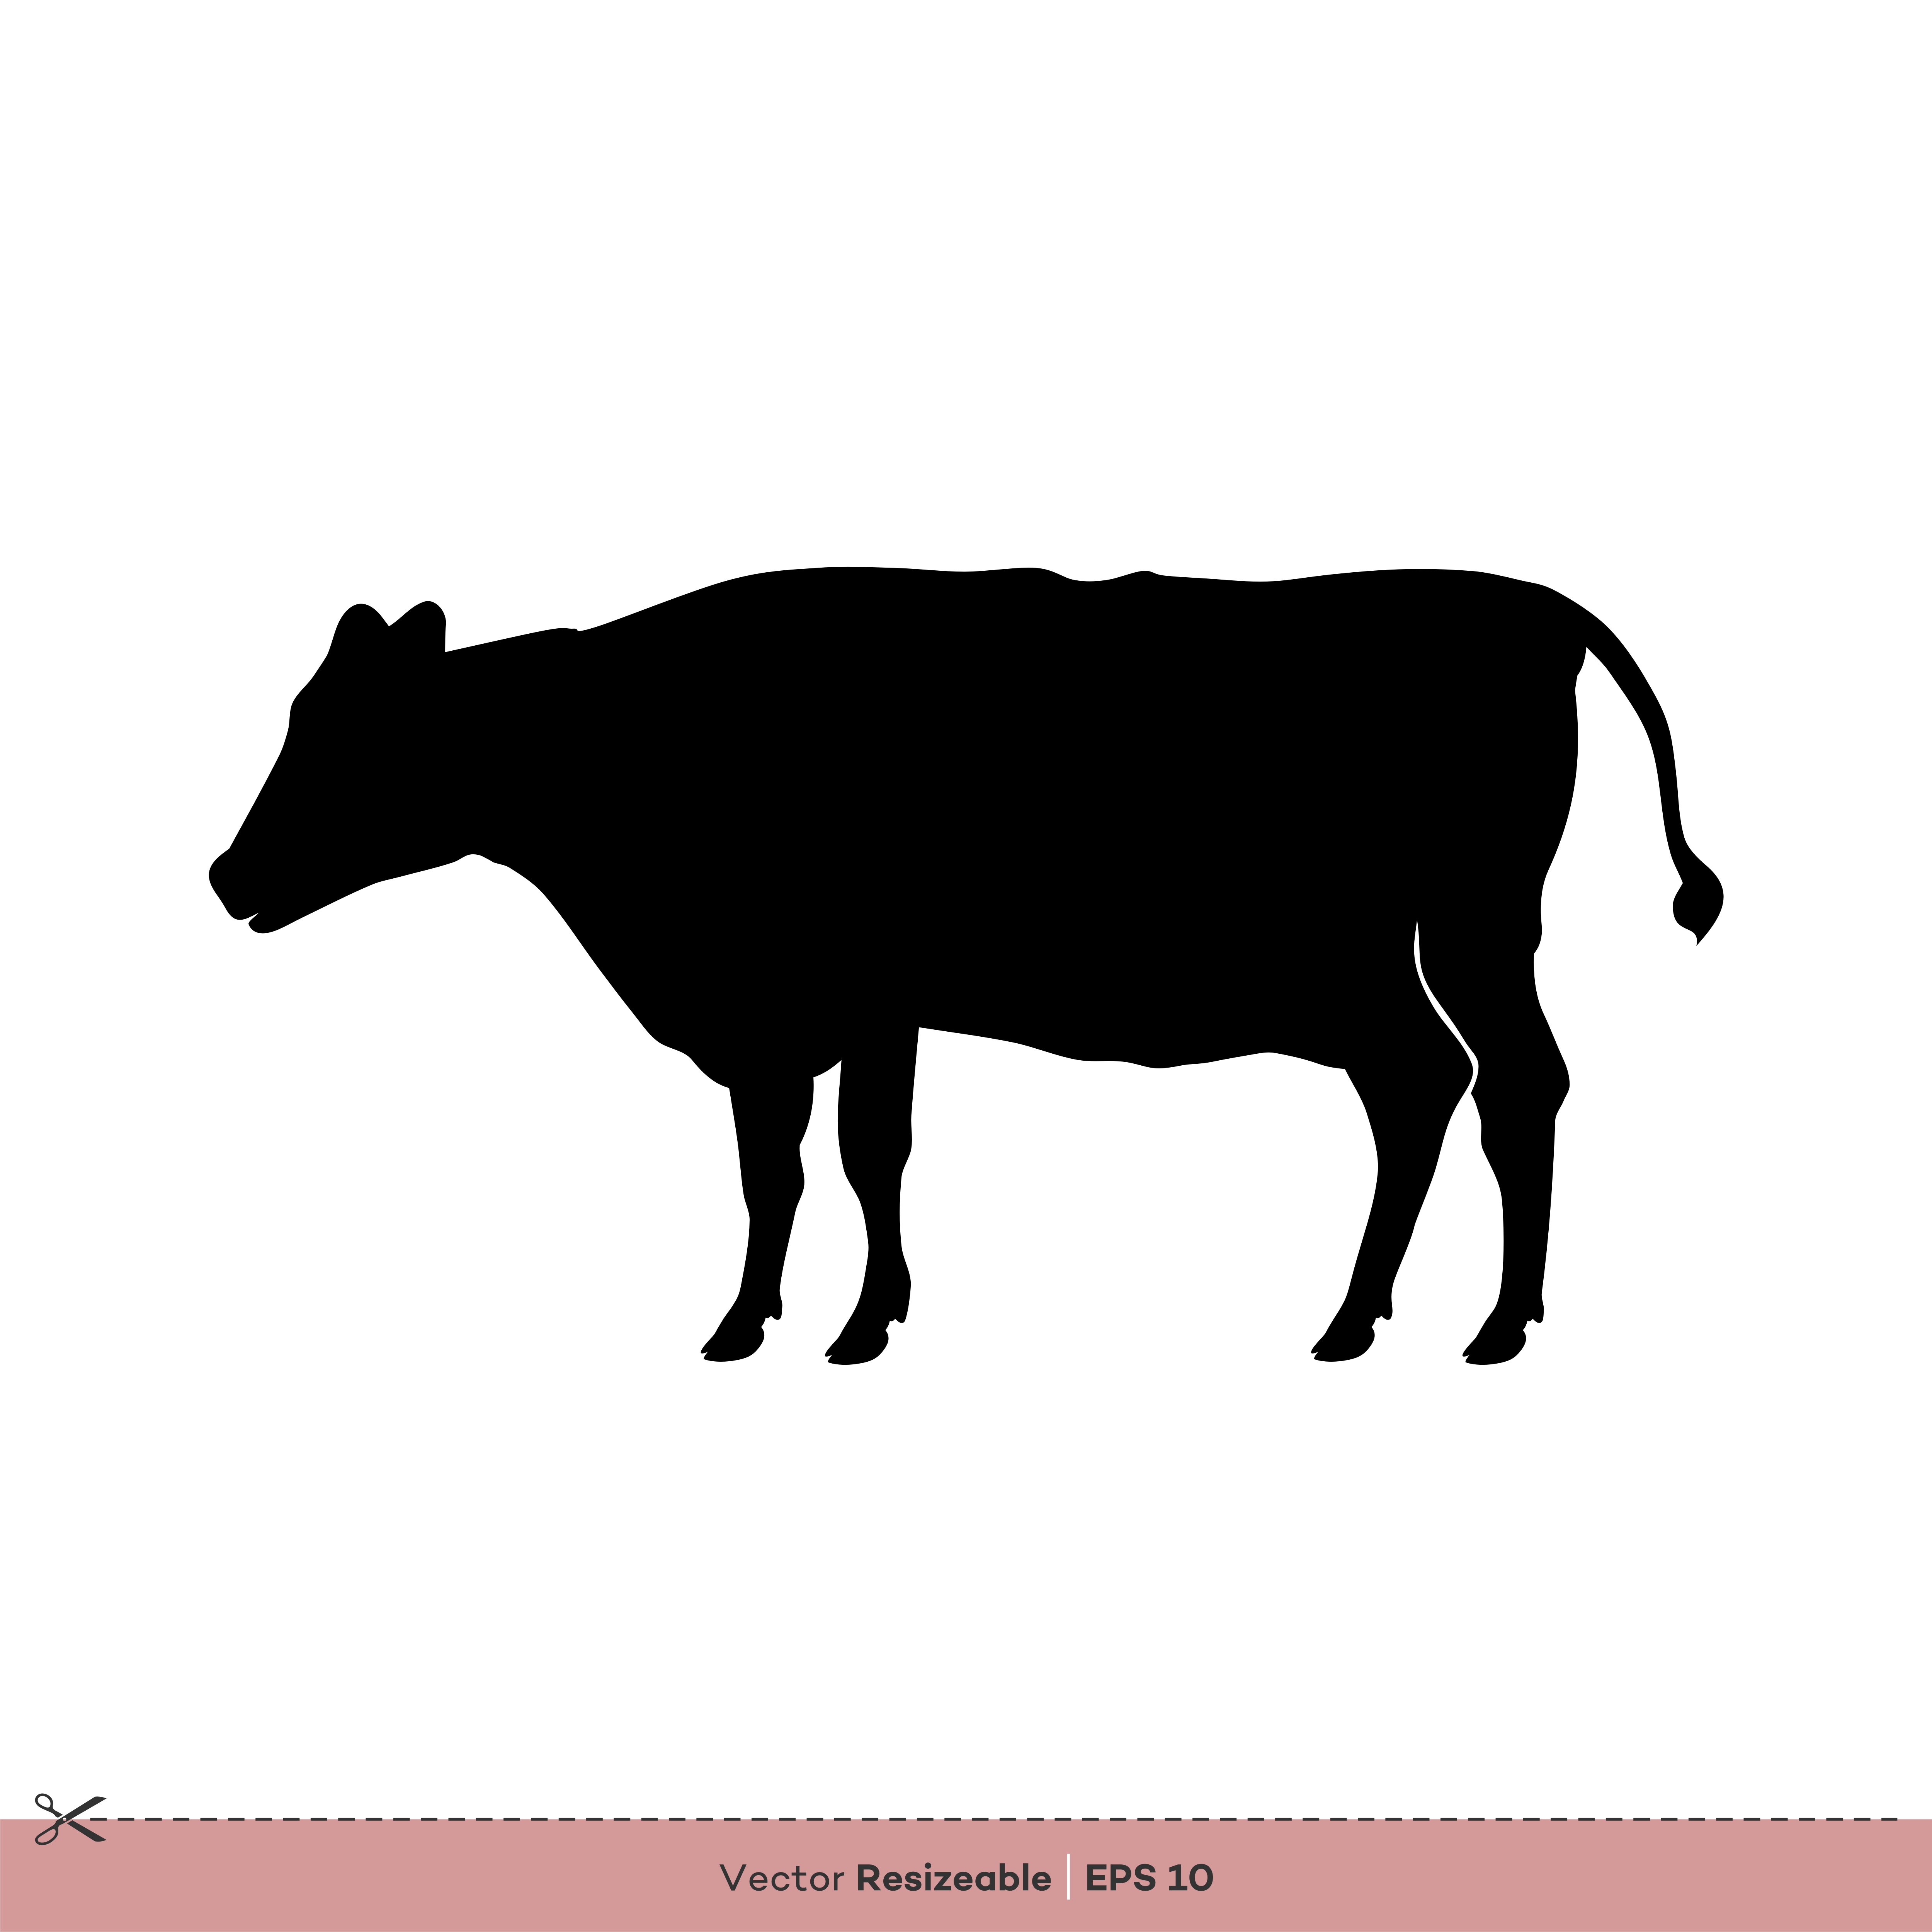 Download Cow Silhouette Vector Logo Template Illustration Design - Download Free Vector Art, Stock ...